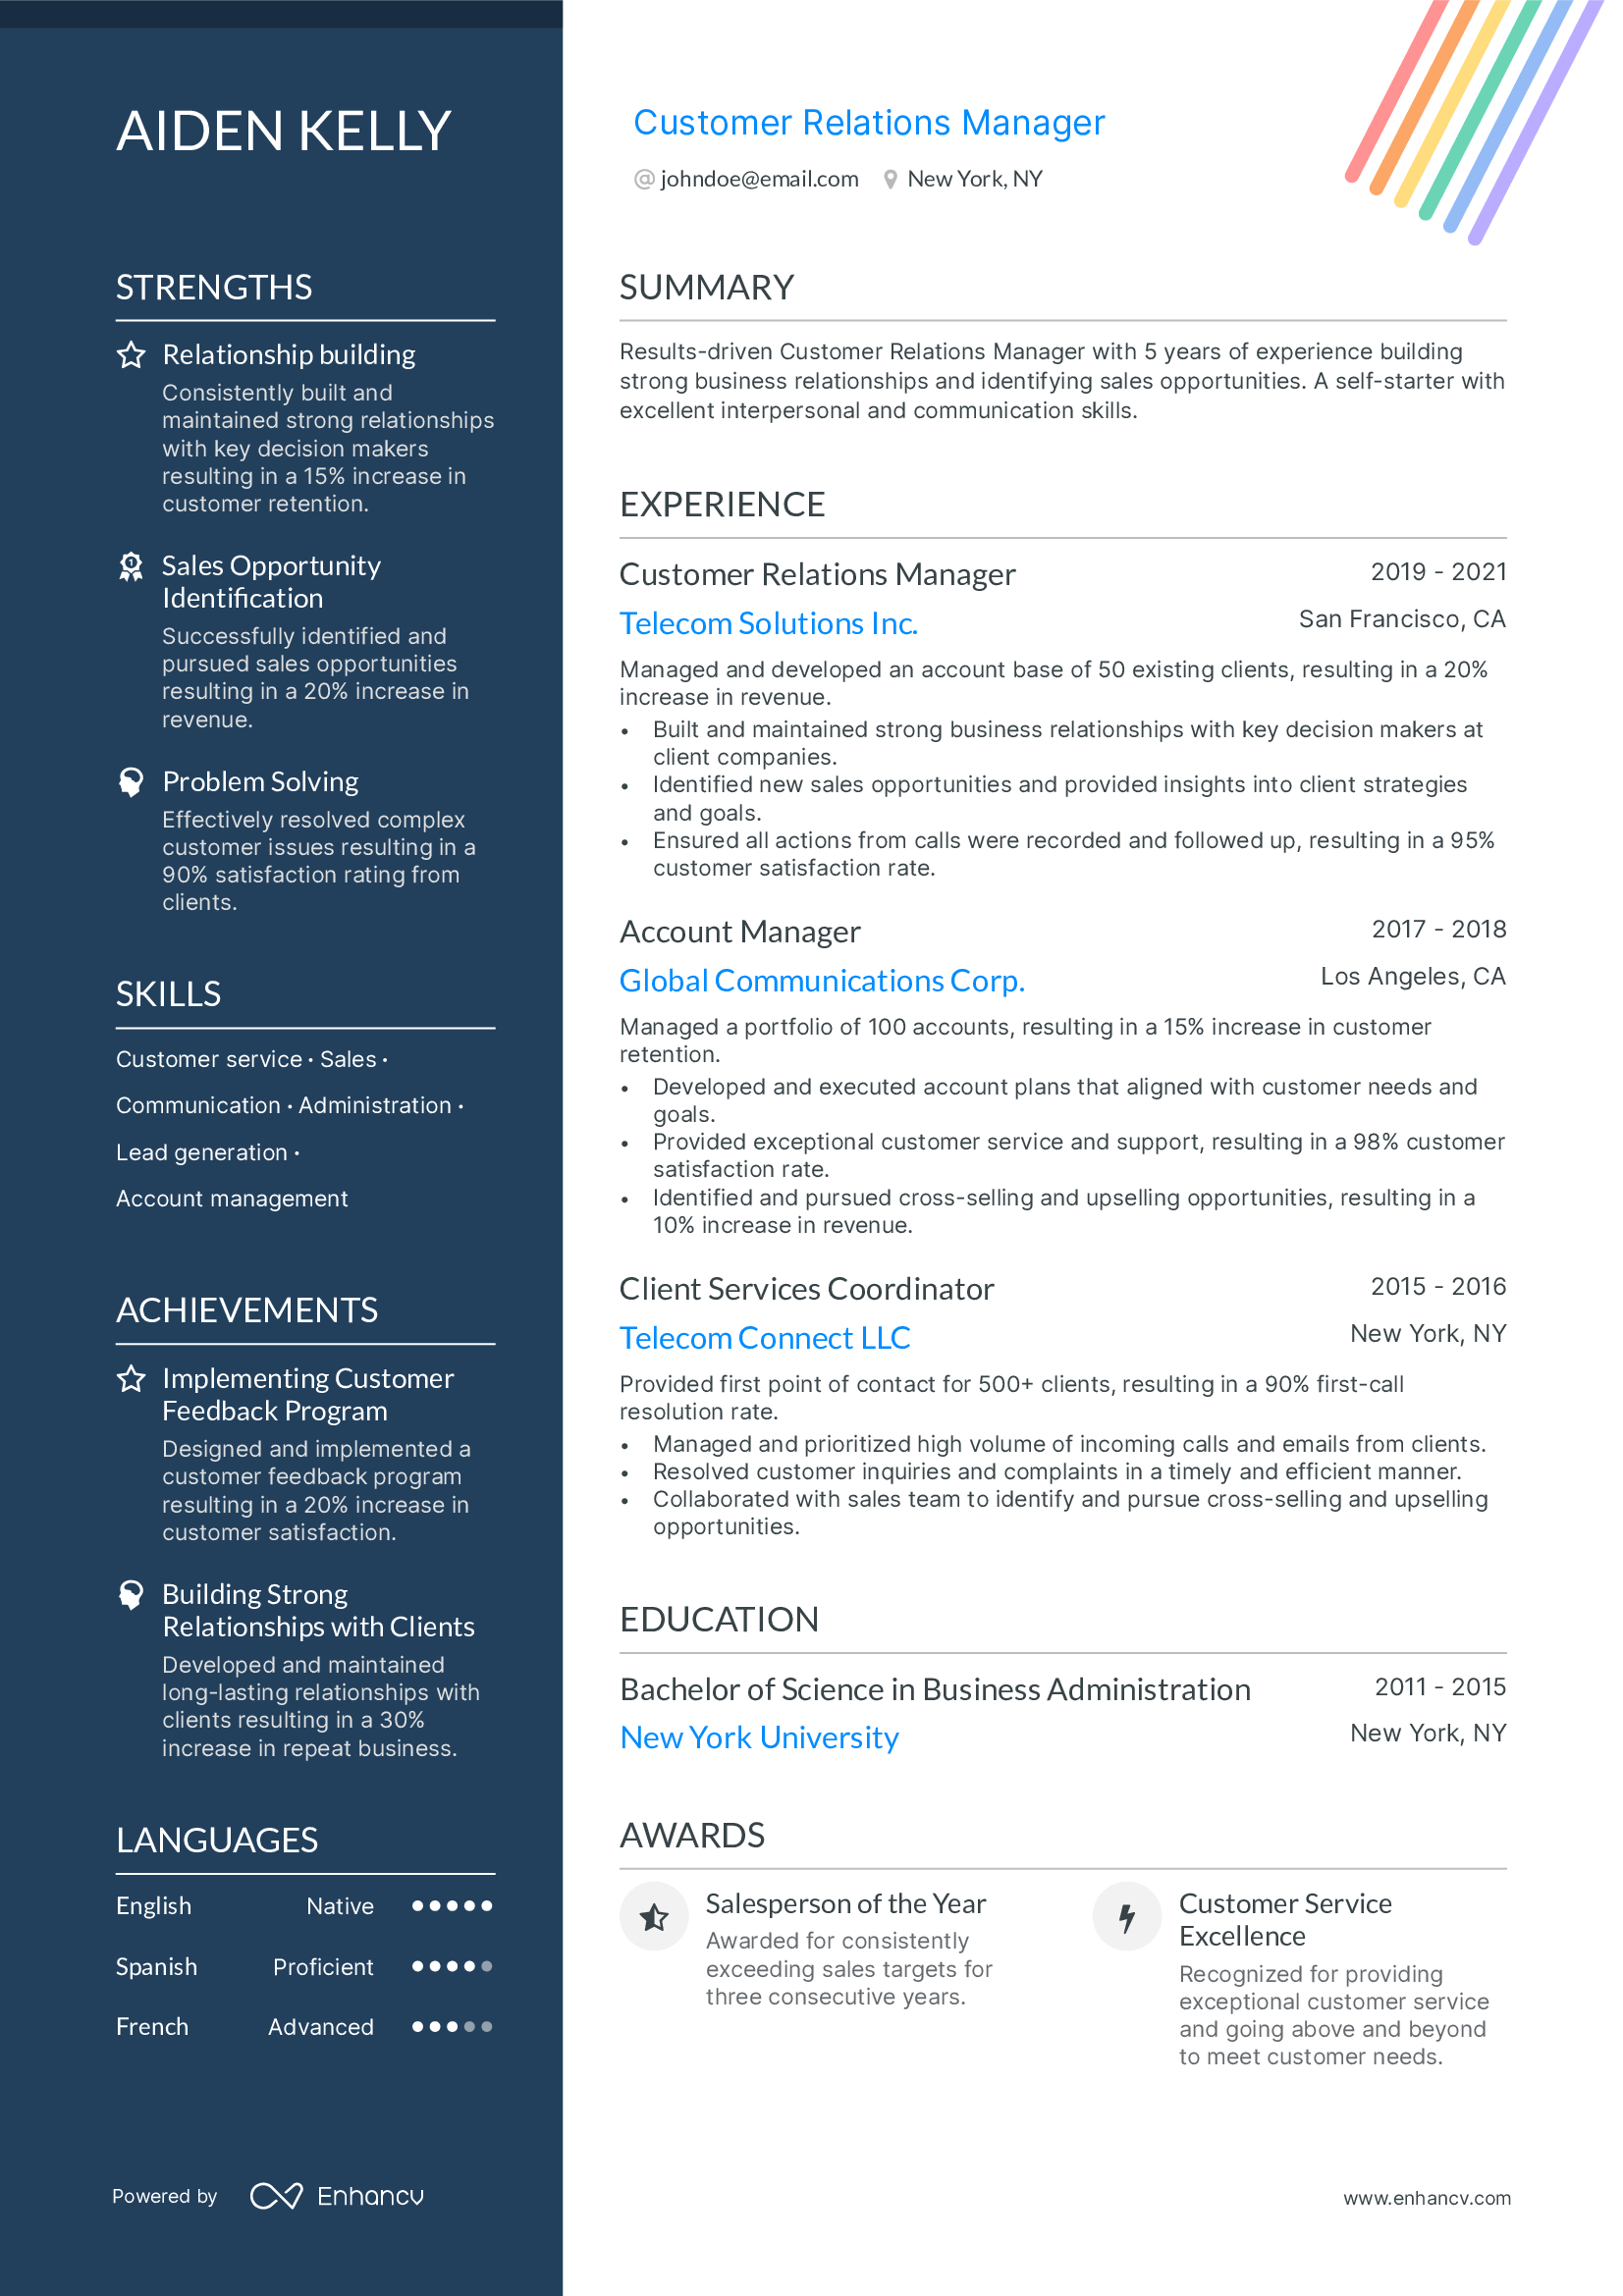 Customer Relations Manager resume example